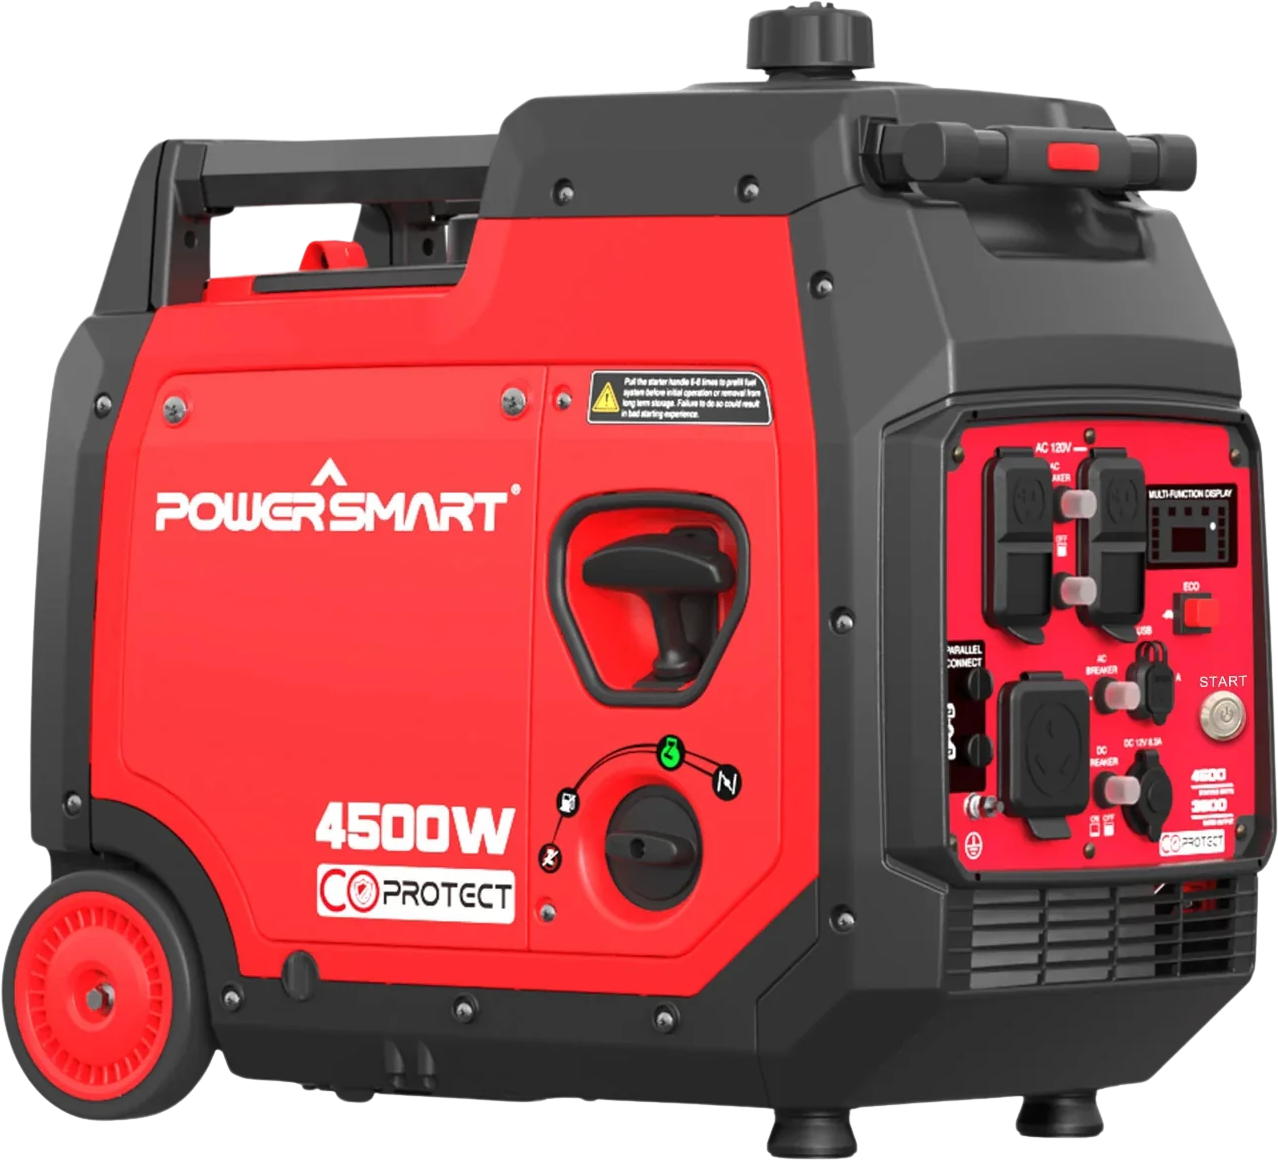 Powersmart PS5045CE Inverter Generator 3600W/4500W Low THD Parallel and RV Ready with CO Detect 4 Stroke Gas Electric Start New